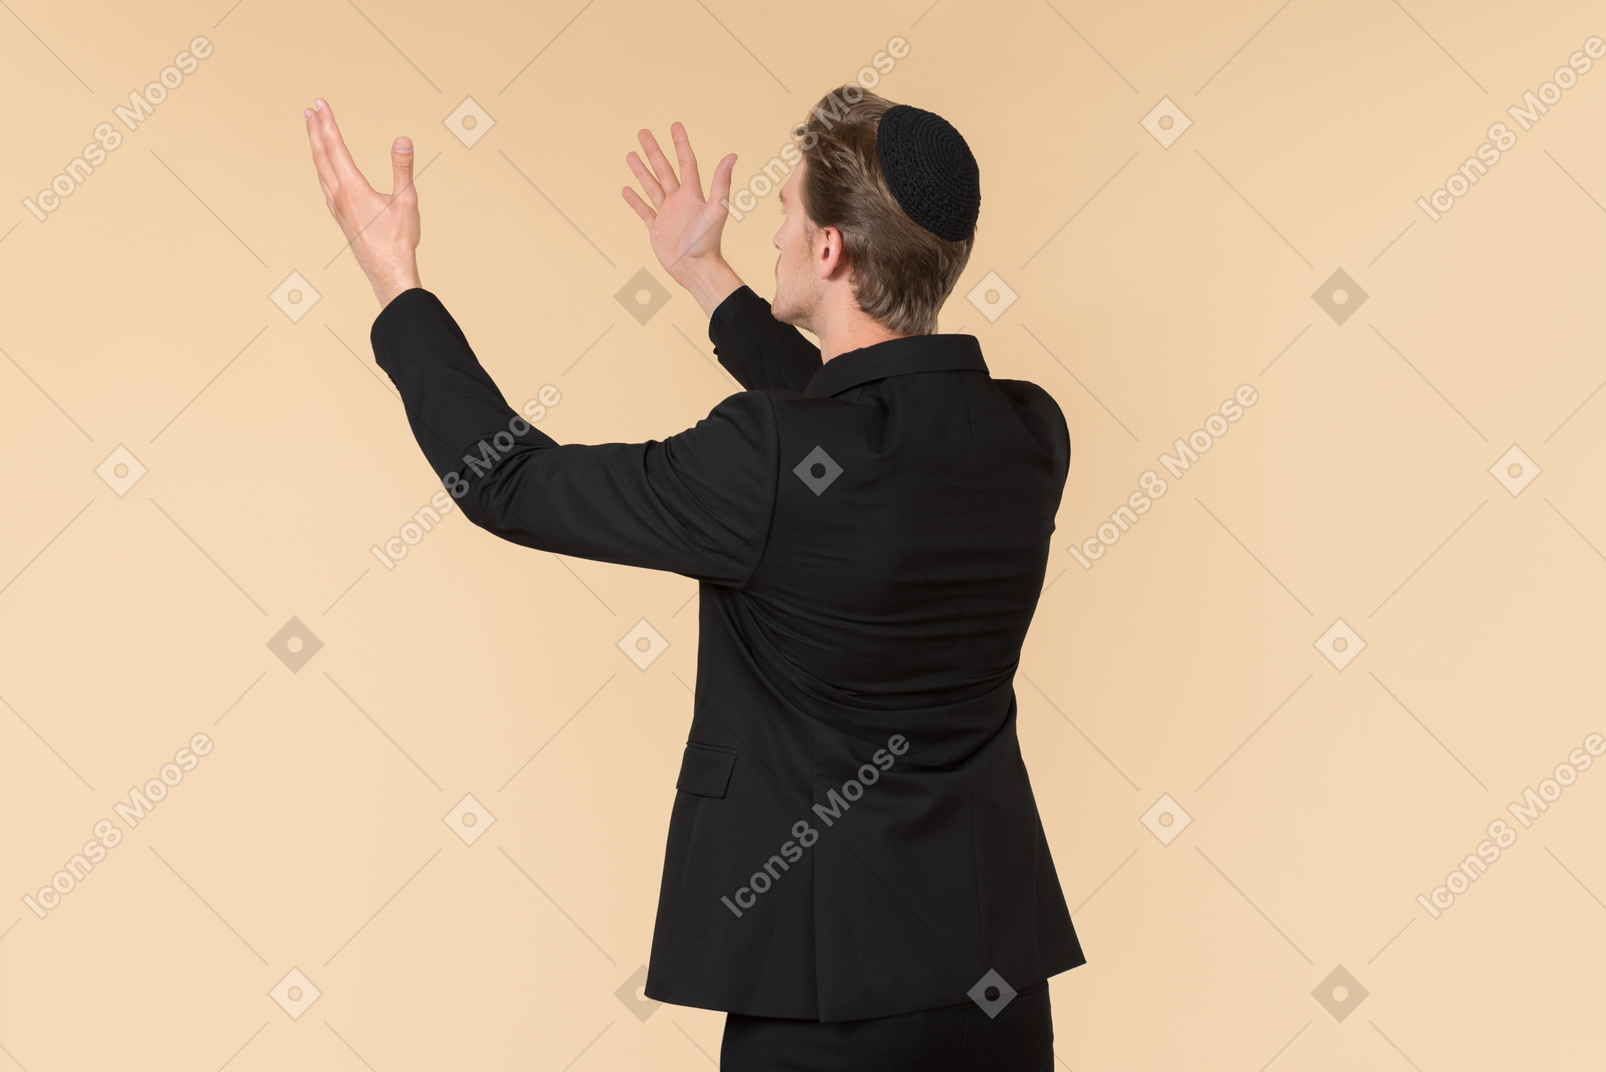 Young man in a black suit and a kippah praying